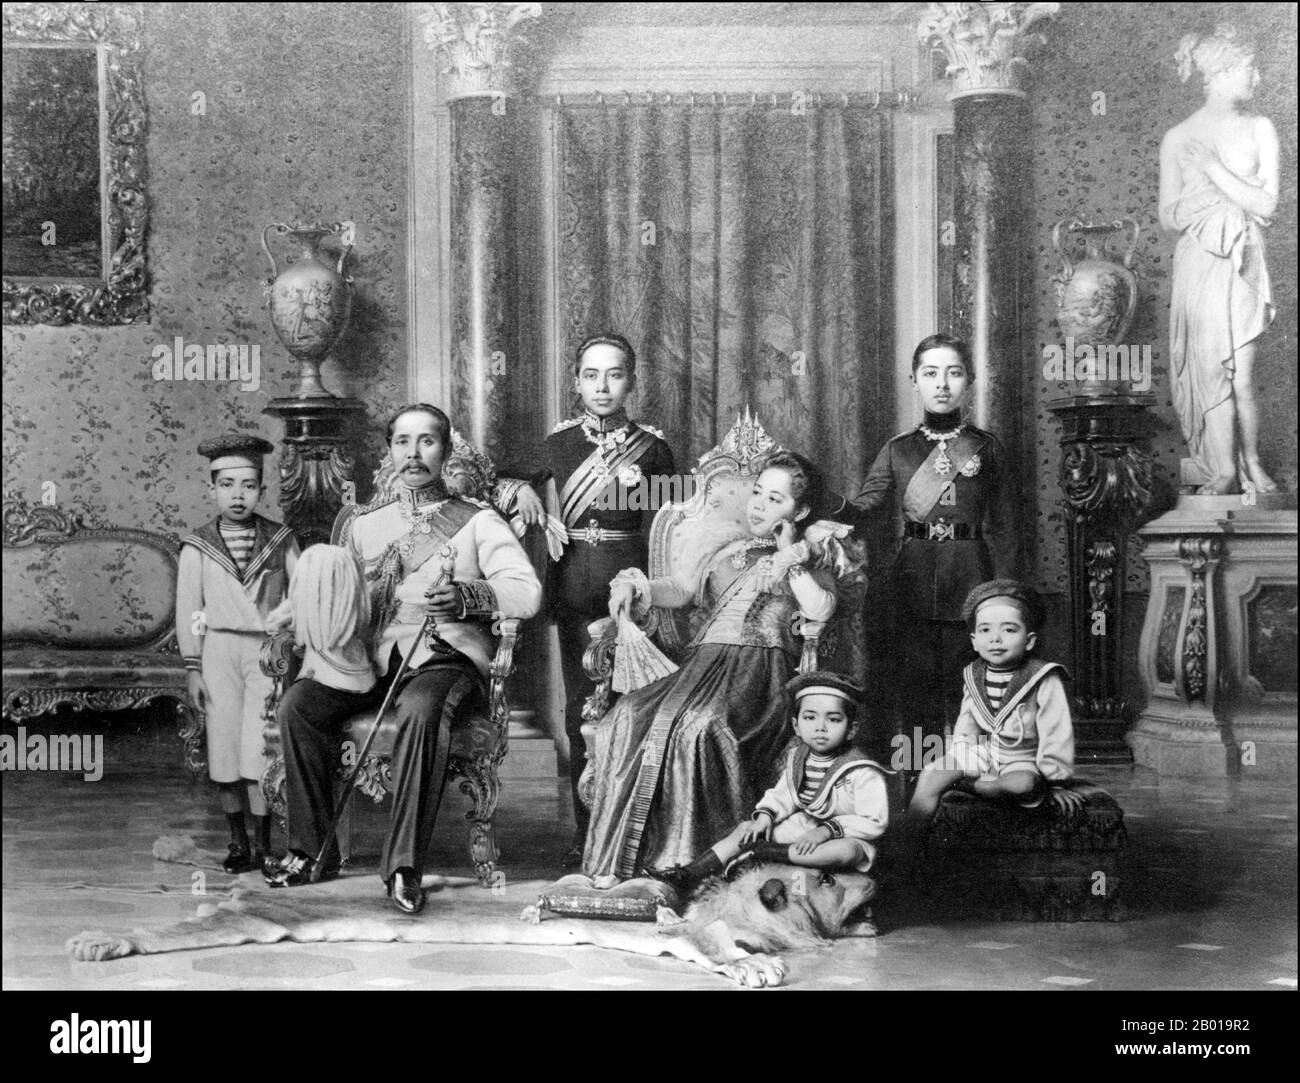 Thailand: King Chulalongkorn (20 September 1853 – 23 October 1910) of Siam with Queen Saowabha and royal children, c. 1890.  Phra Bat Somdet Phra Poramintharamaha Chulalongkorn Phra Chunla Chom Klao Chao Yu Hua, or Rama V, was the fifth monarch of Siam under the House of Chakri.  He is considered one of the greatest kings of Siam. His reign was characterised by the modernisation of Siam, immense government and social reforms, and territorial cessions to the British Empire and French Indochina.  He is seen here with Queen Saowabha (1864-1919), who bore him nine children, including two kings. Stock Photo